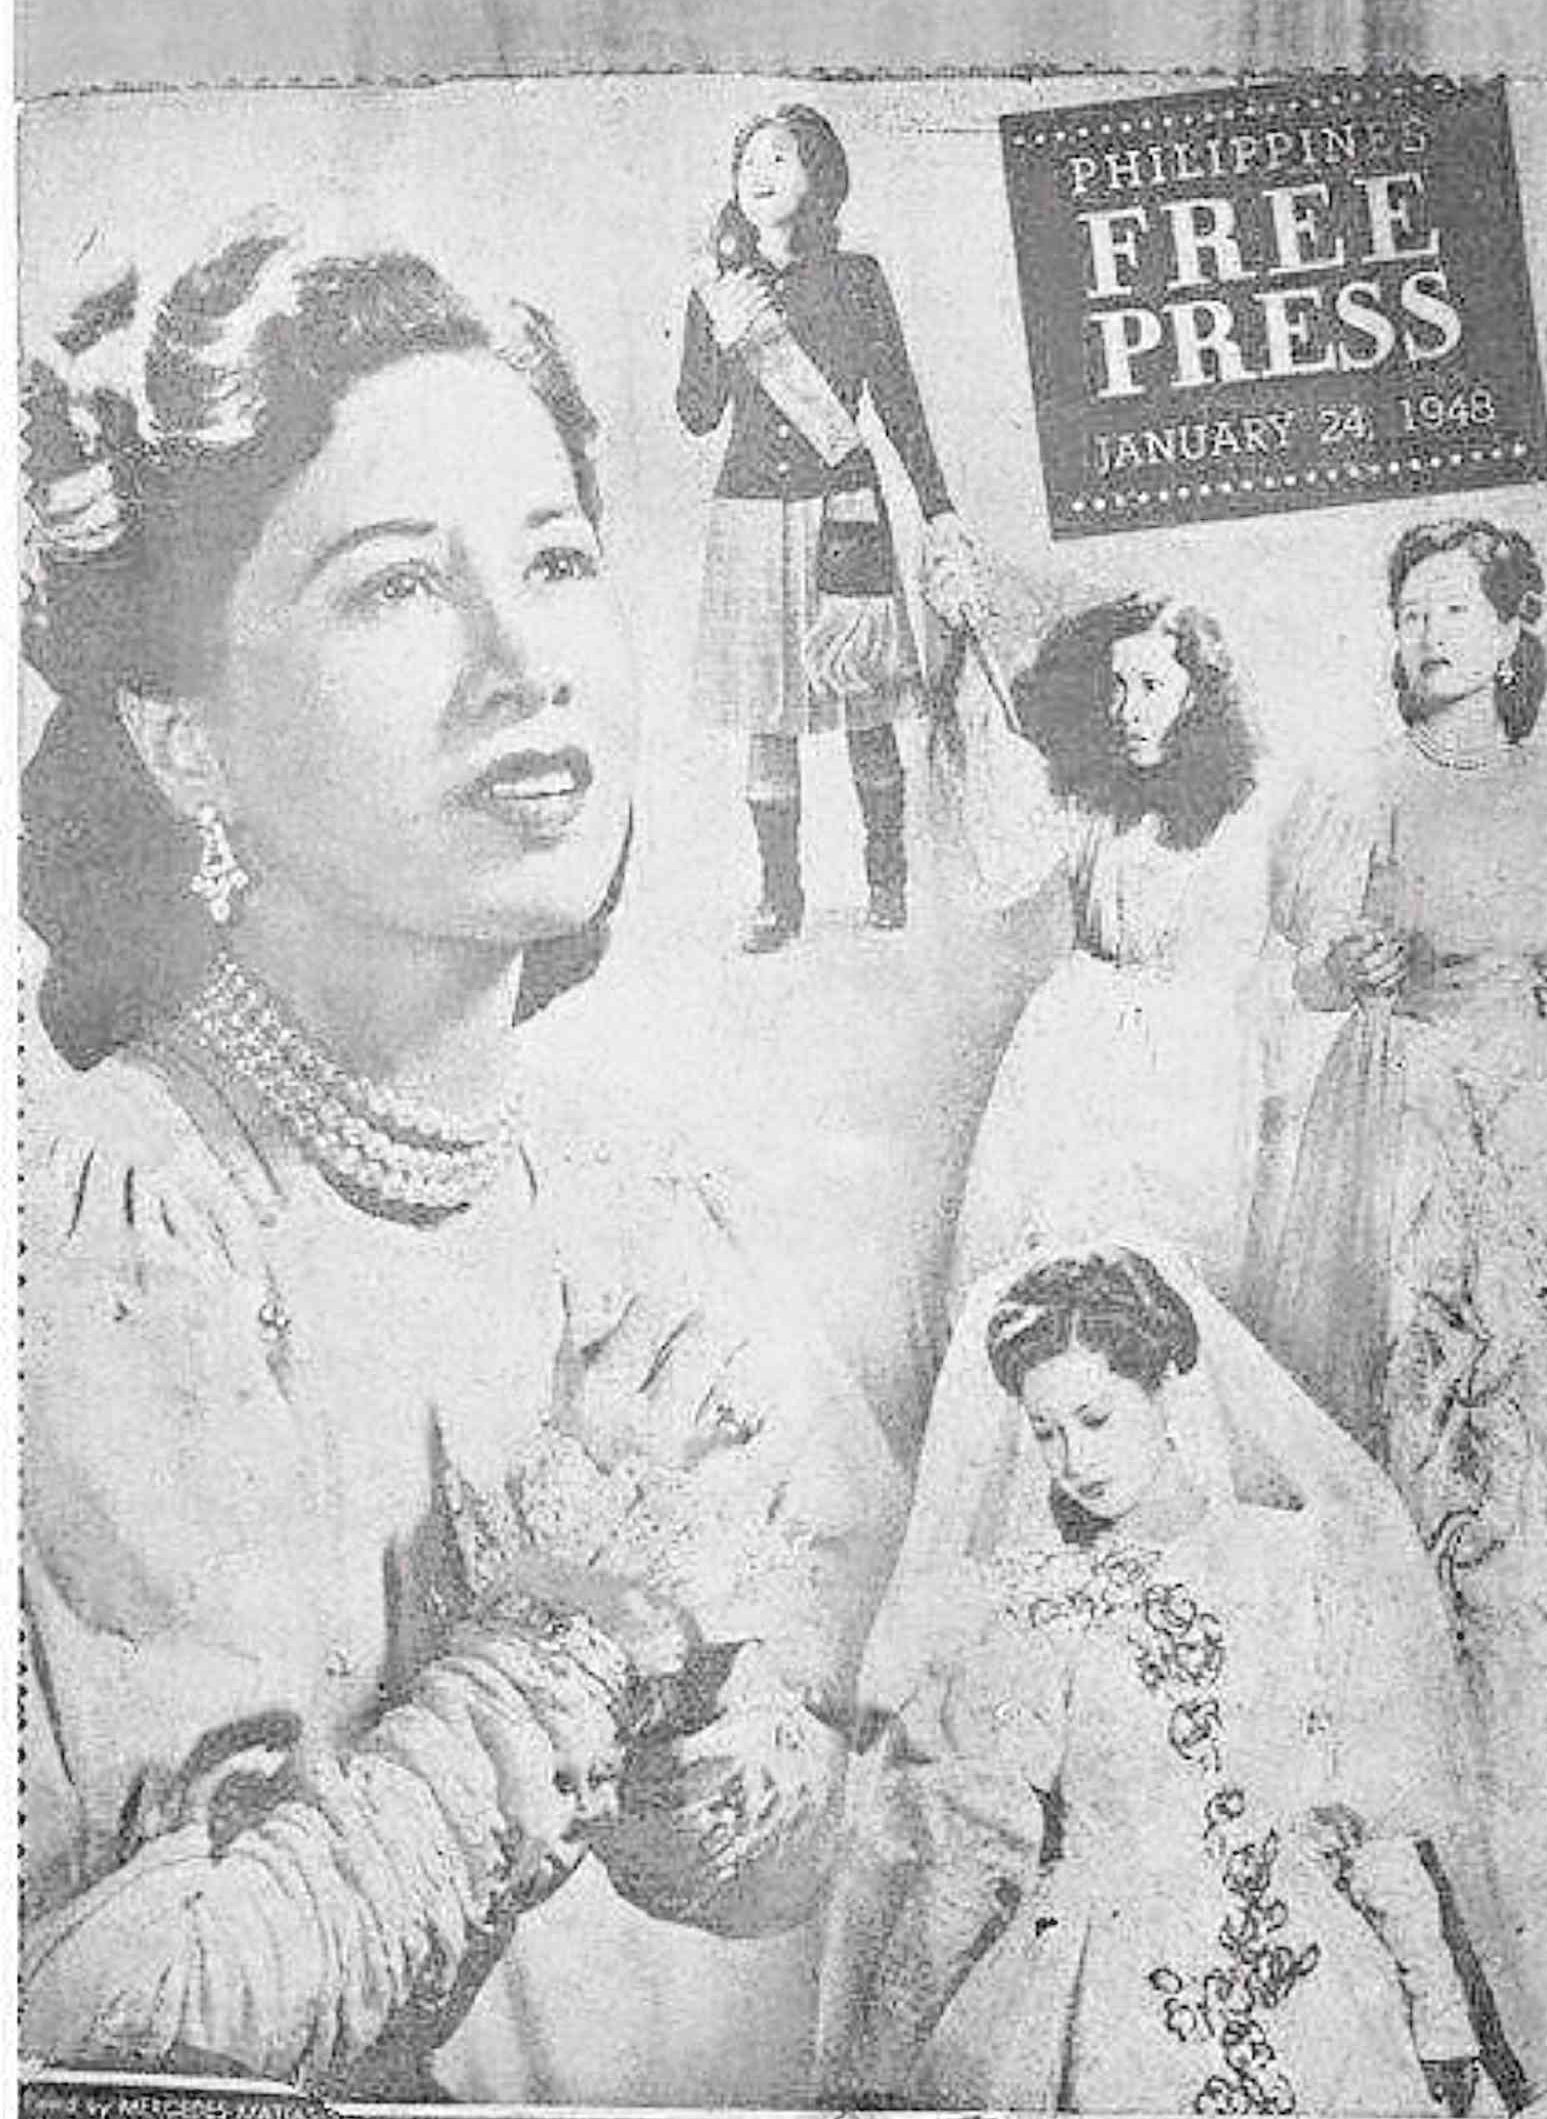 Mercedes Matias Santiago as Lucia di Lamermoor on the cover of the Philippine Free Press, 1948